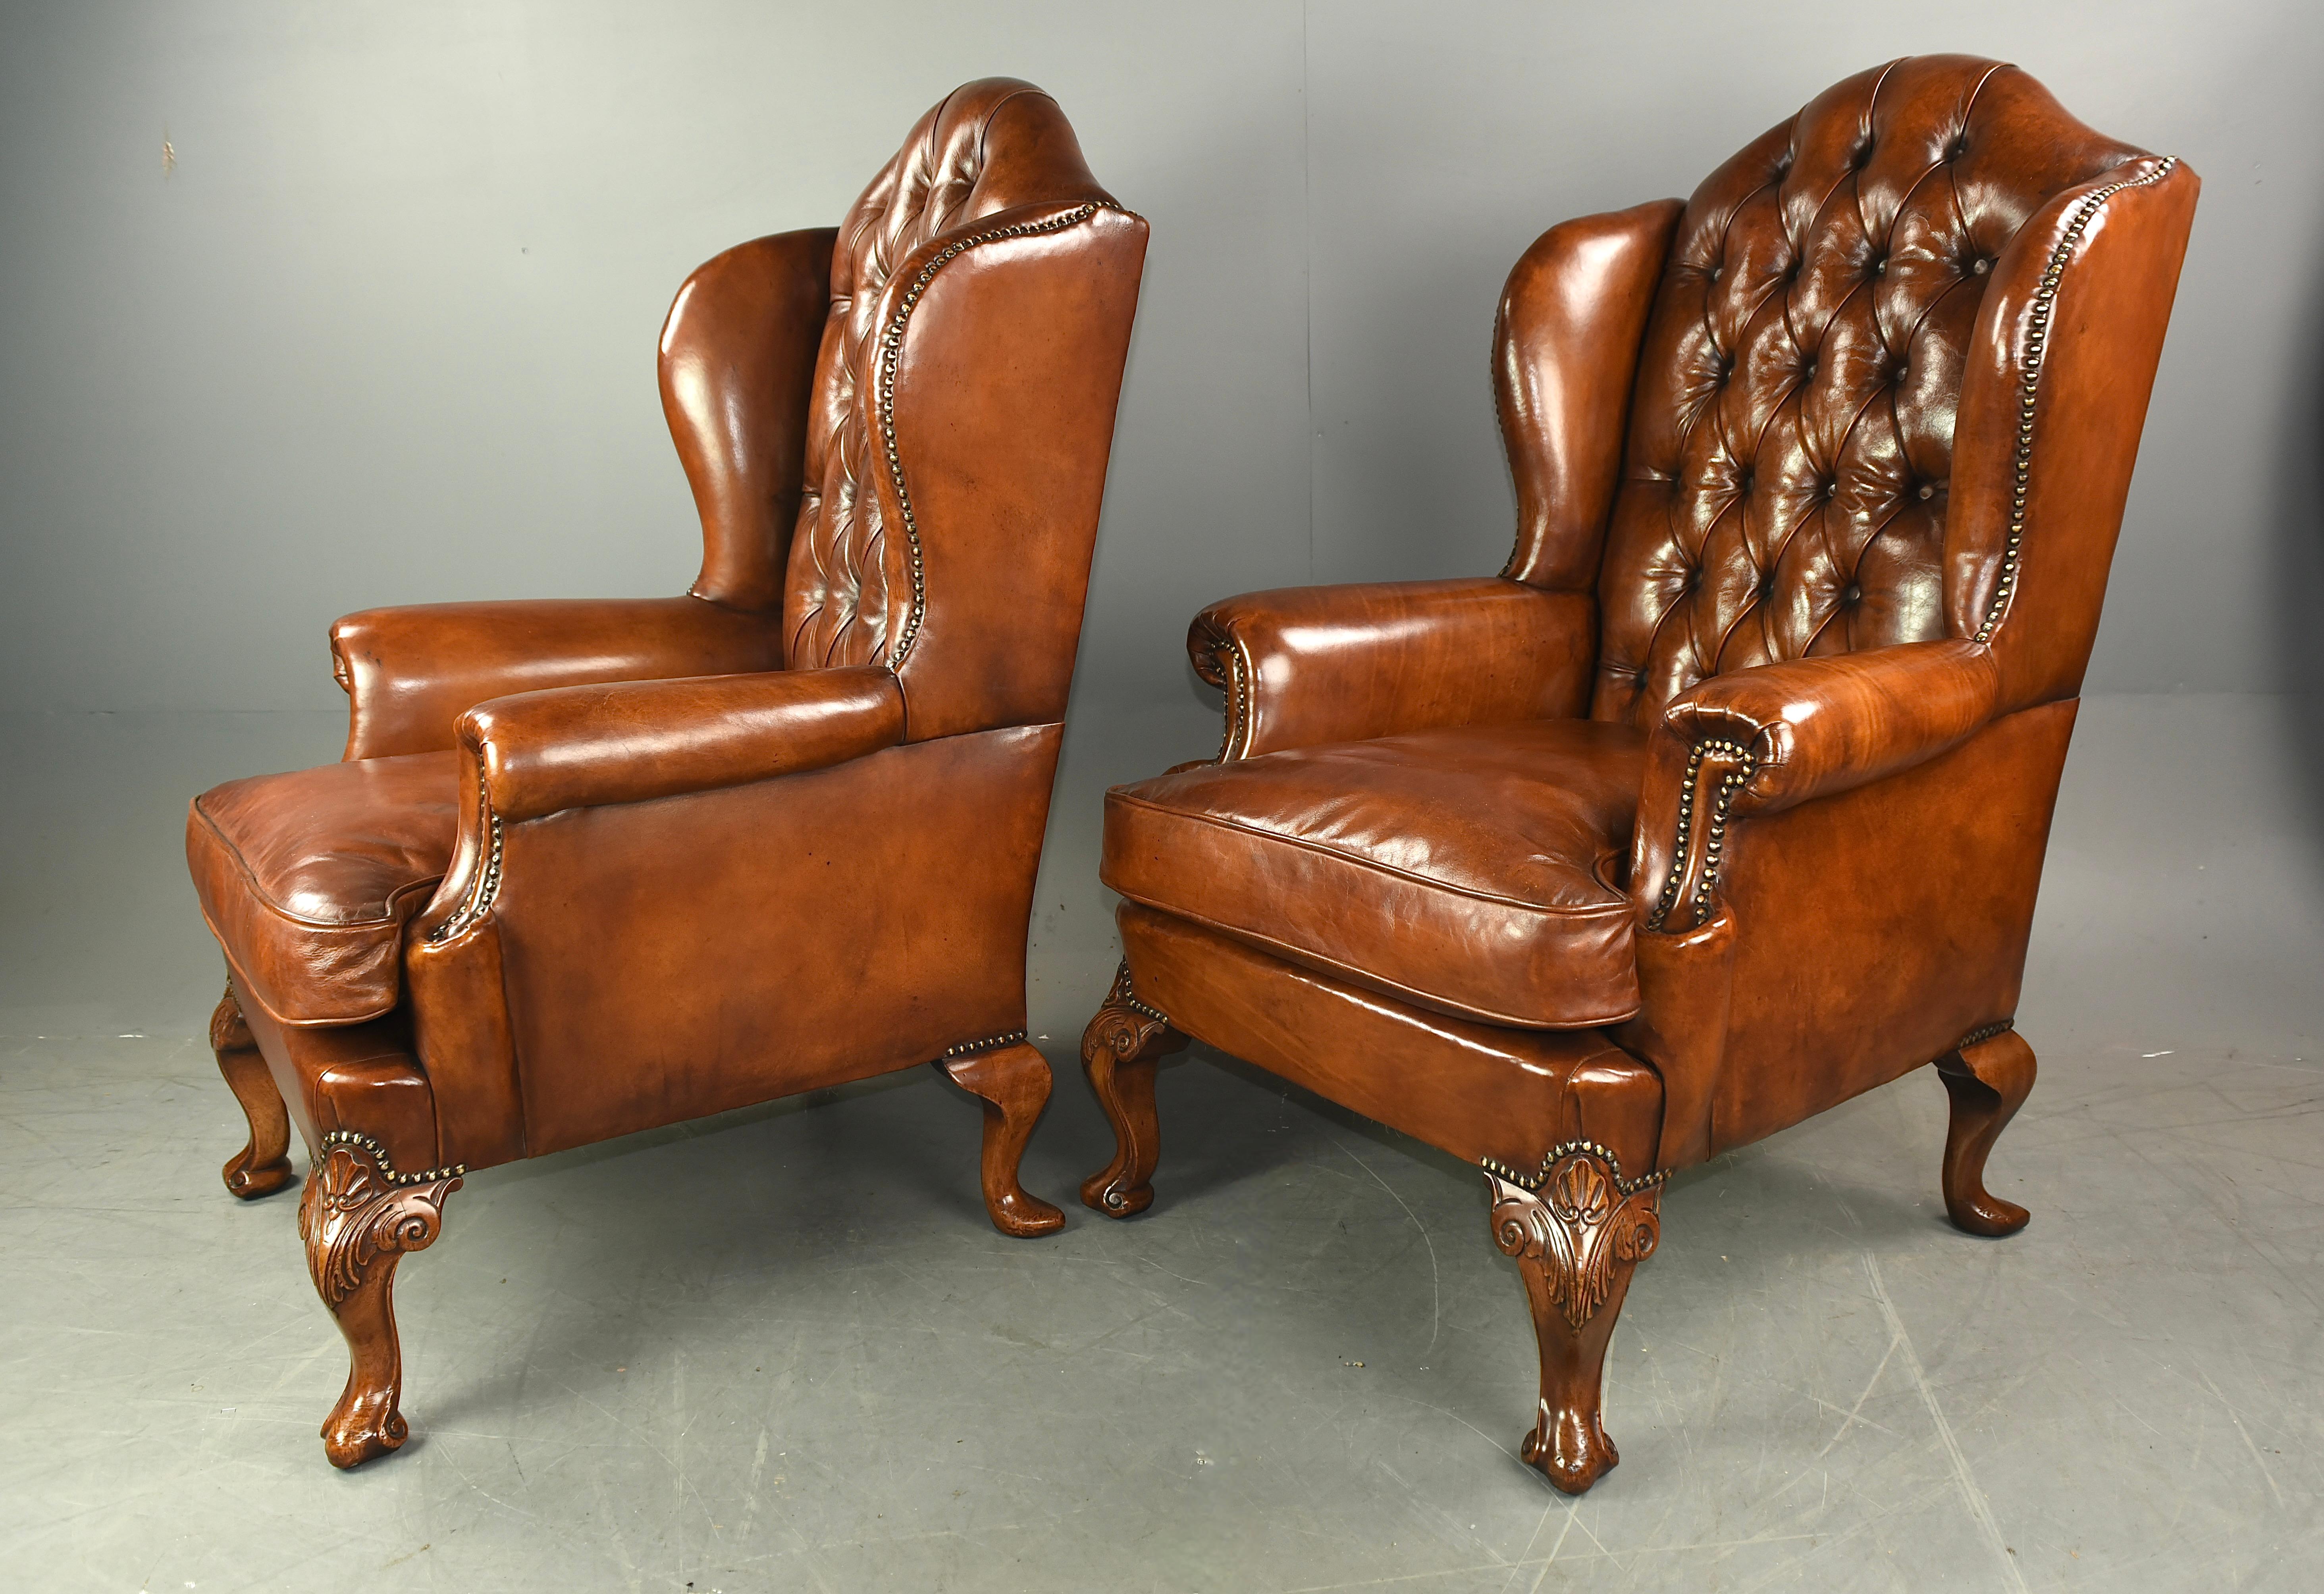 These large Antique leather wing chairs circa 1900 feature a rich ,patinated hand dyed leather upholstery that been newly upholstered  with intricate brass studding ,The high curved backs give the chairs a sense of elegance .standing on fine carved